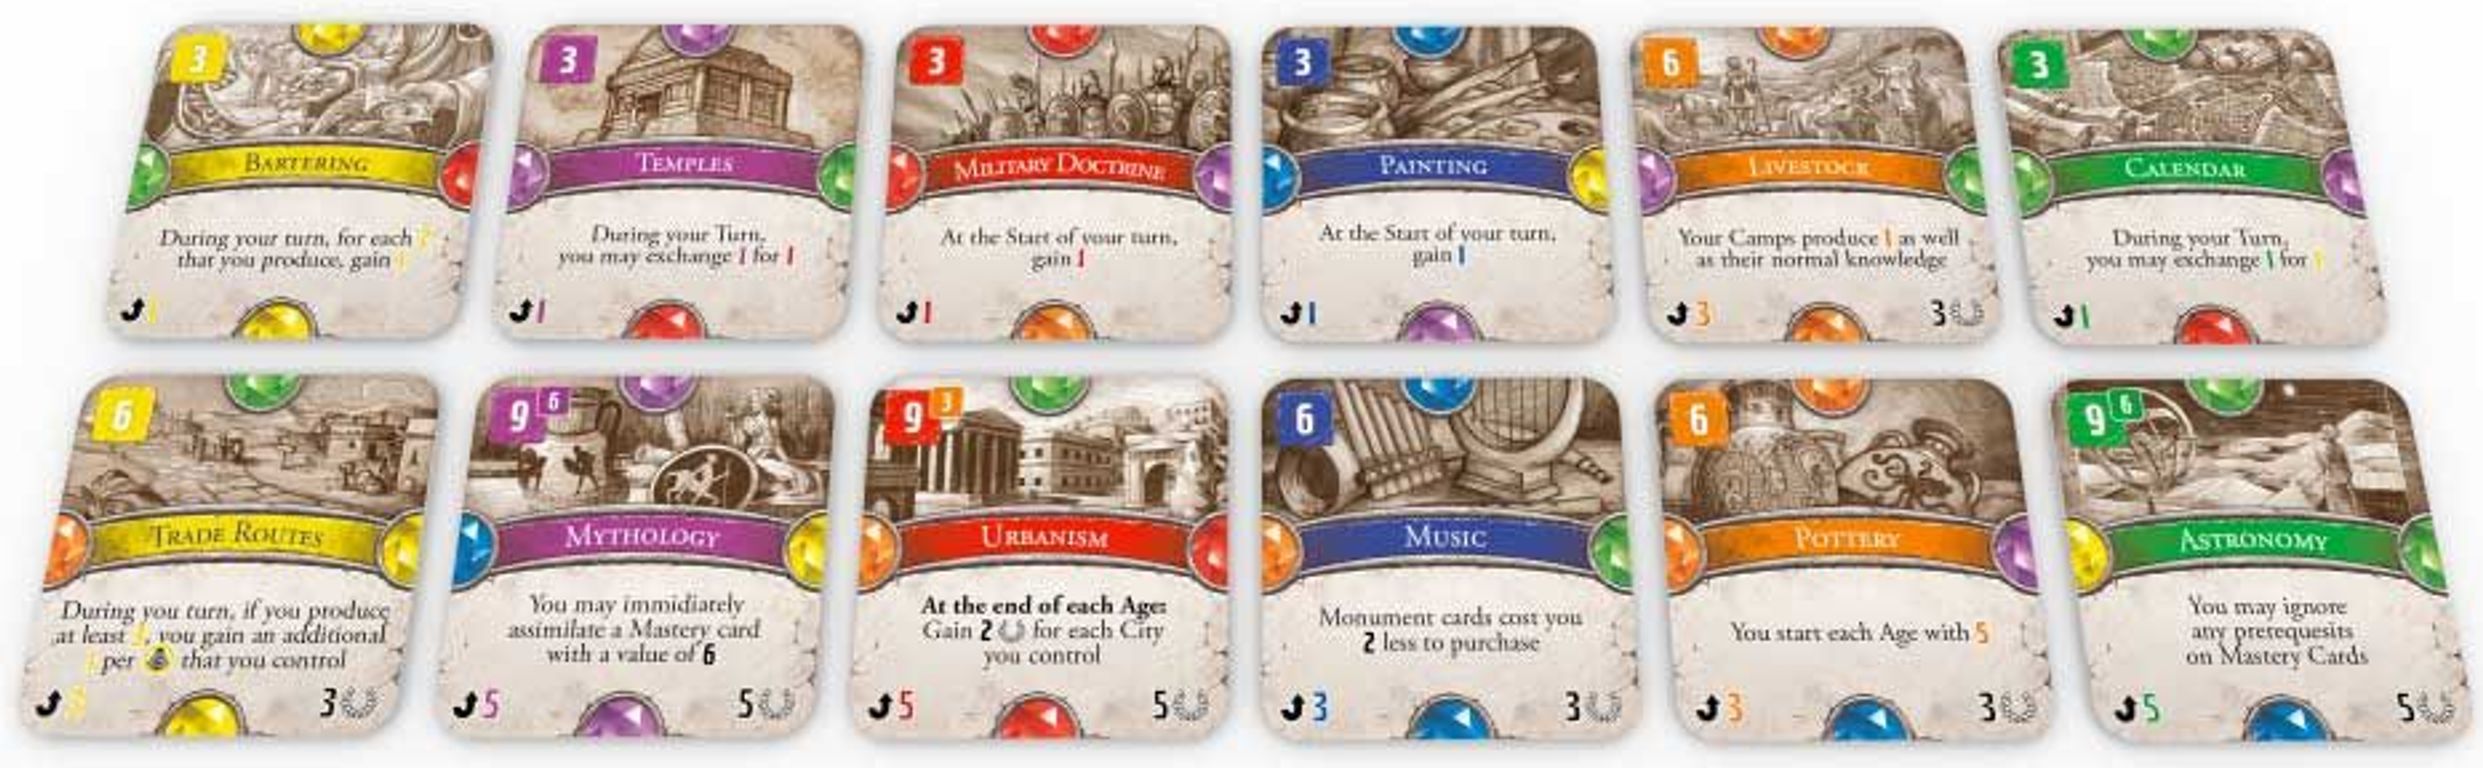 Dominations: Road to Civilization cards